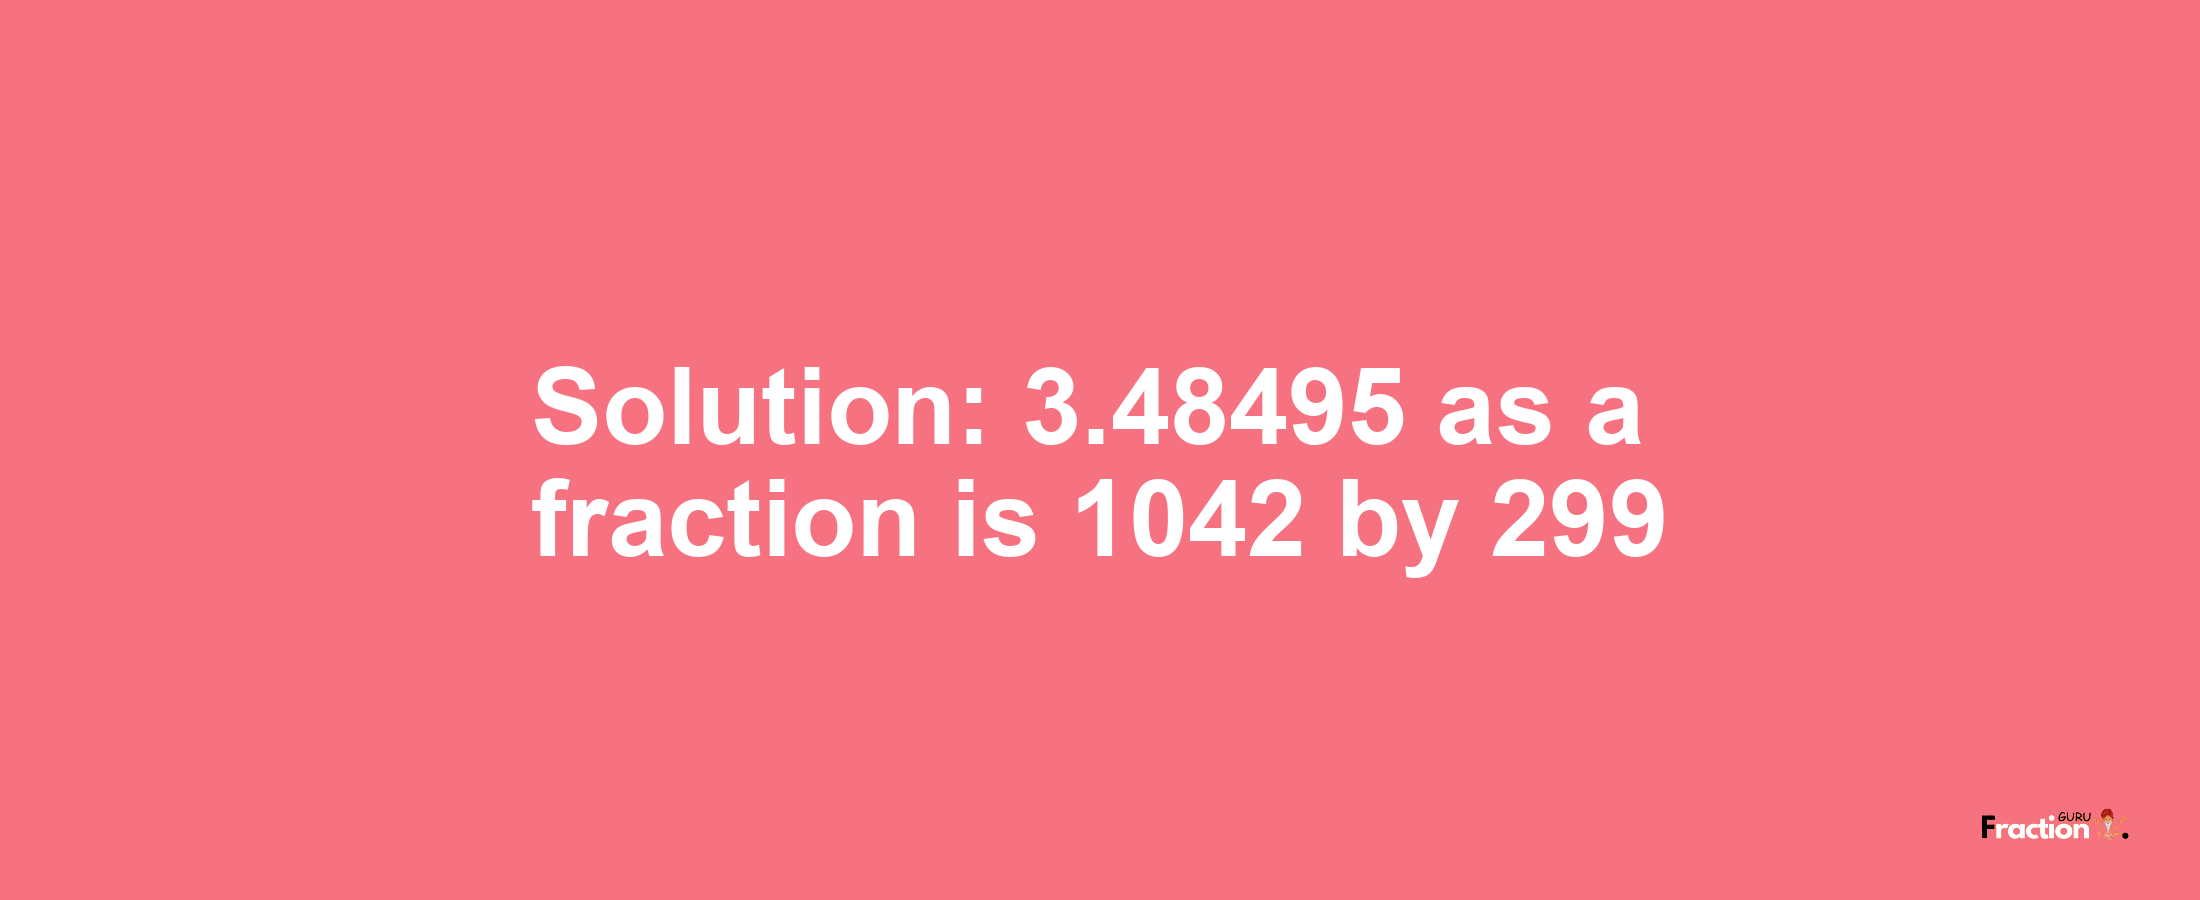 Solution:3.48495 as a fraction is 1042/299